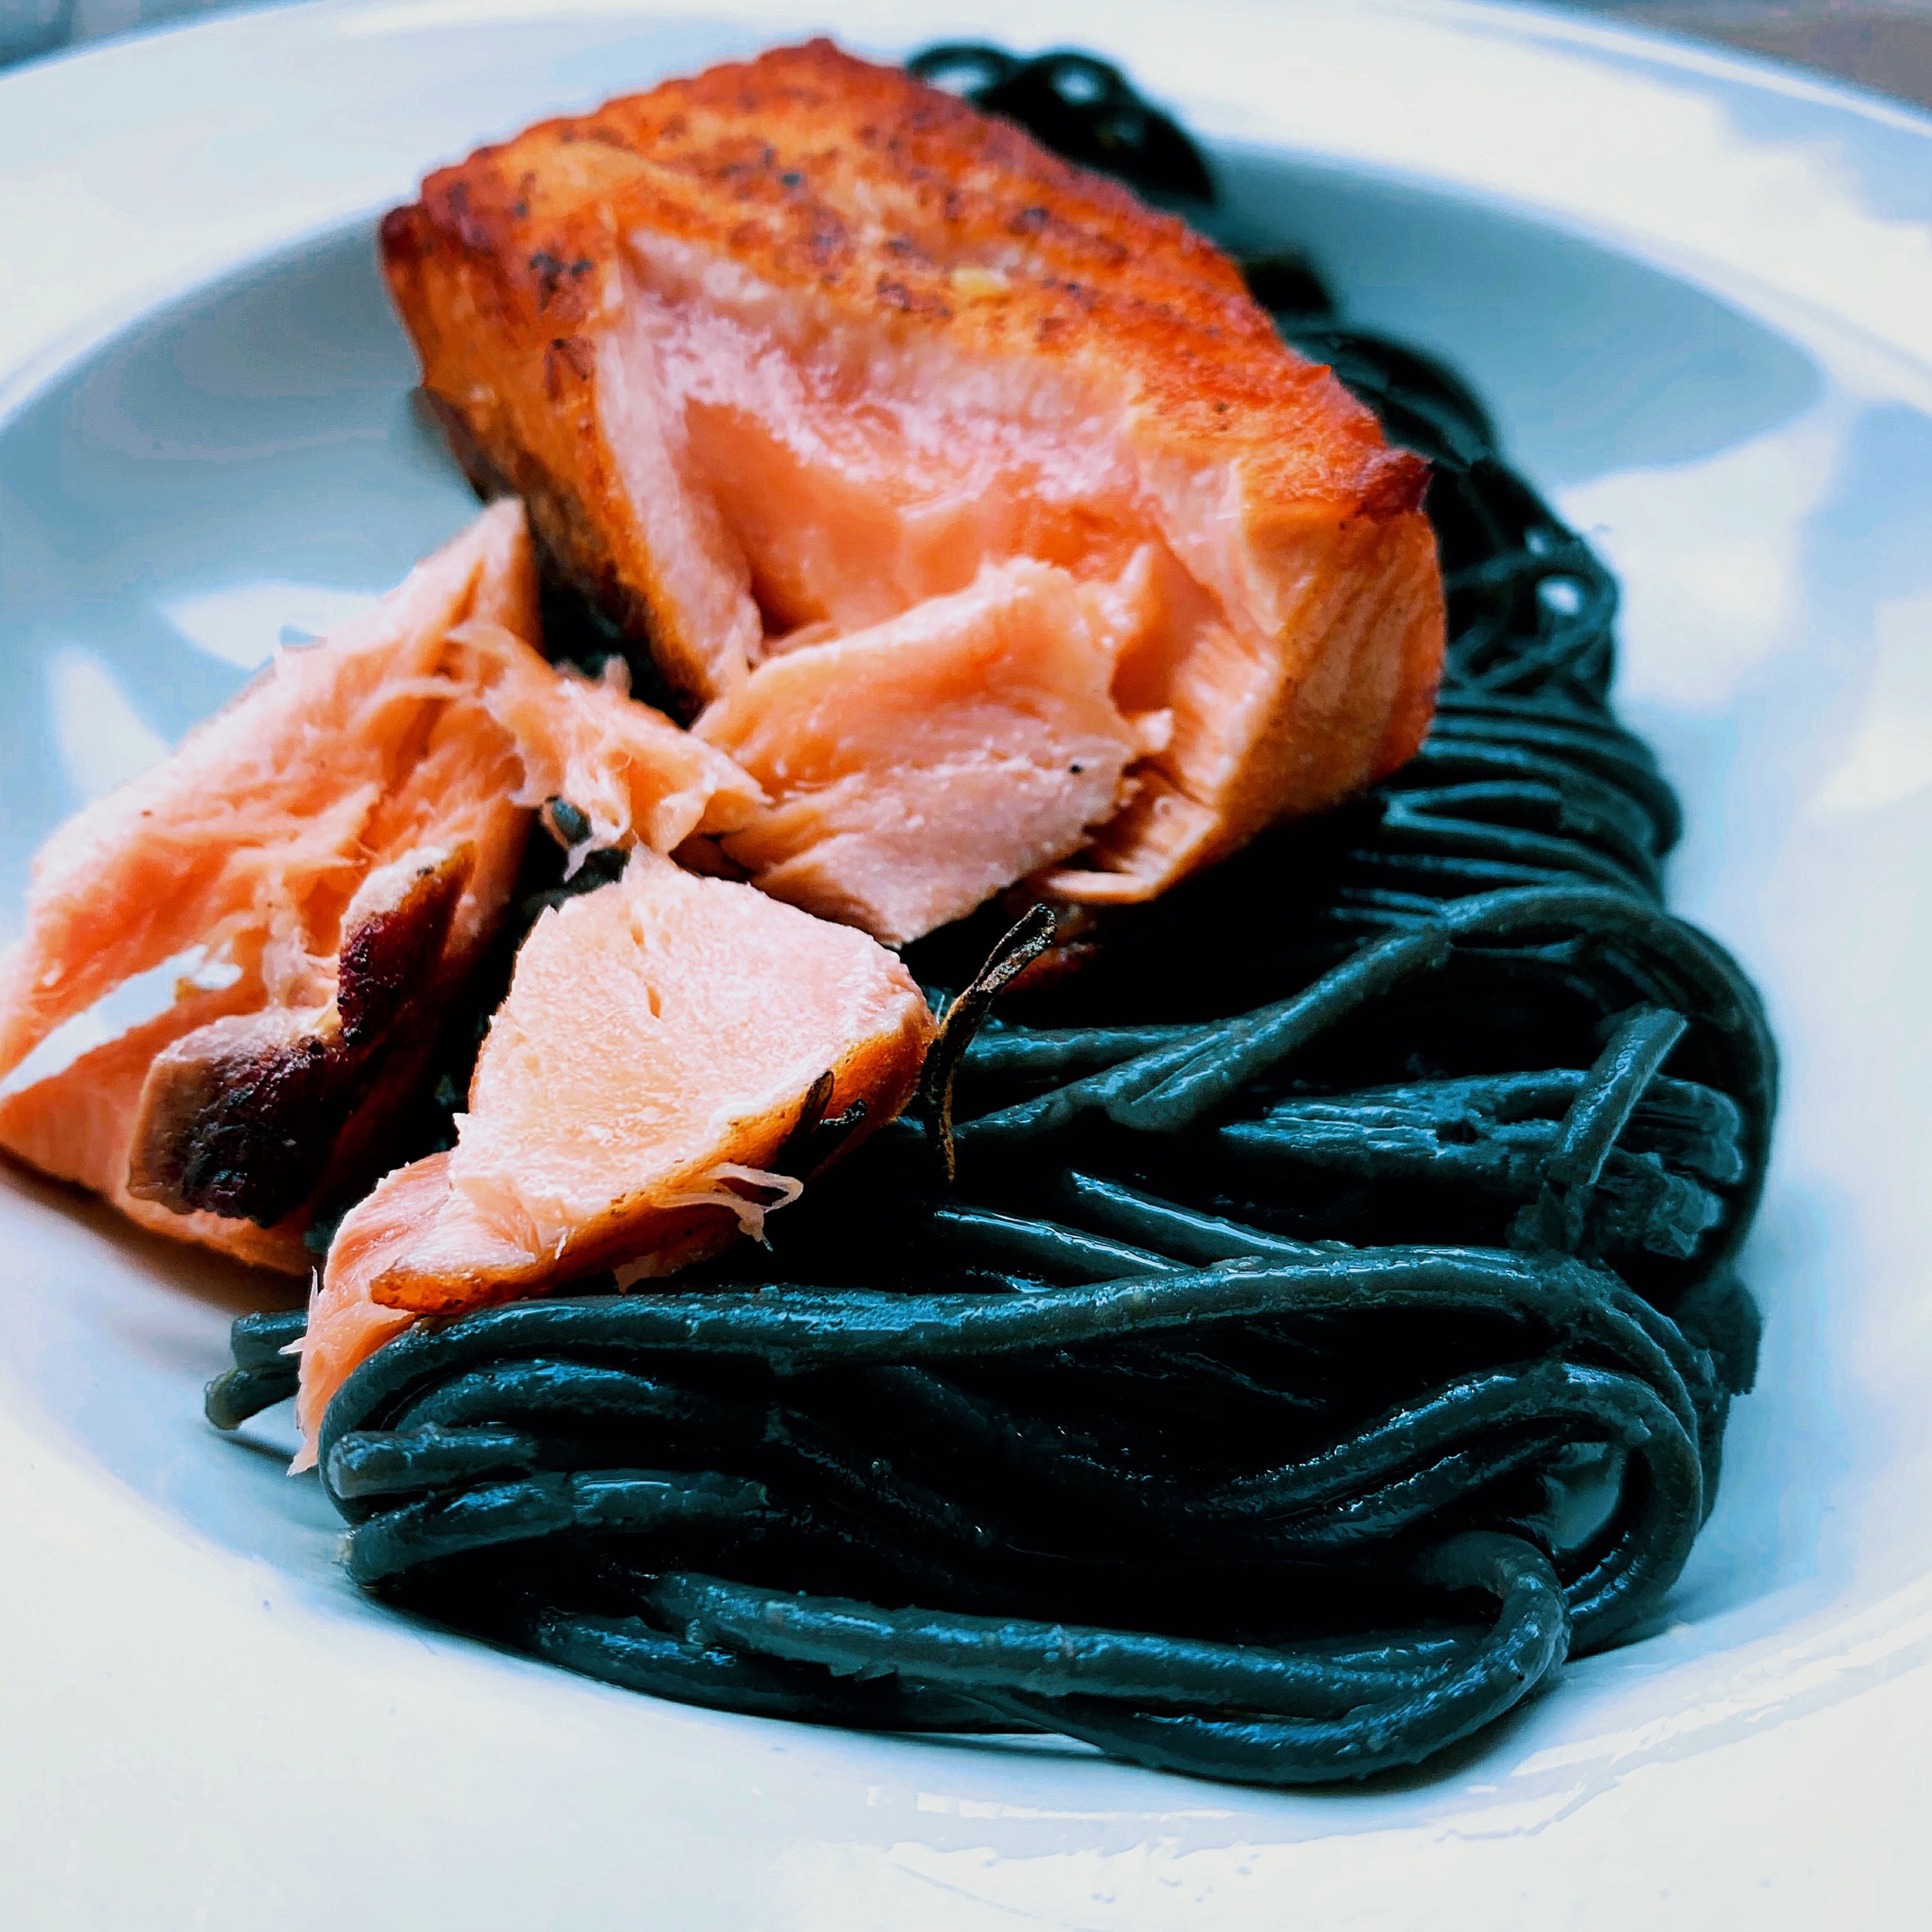 Toss pasta into the pan and plate on a bright white pasta dish. Place salmon on top and serve.